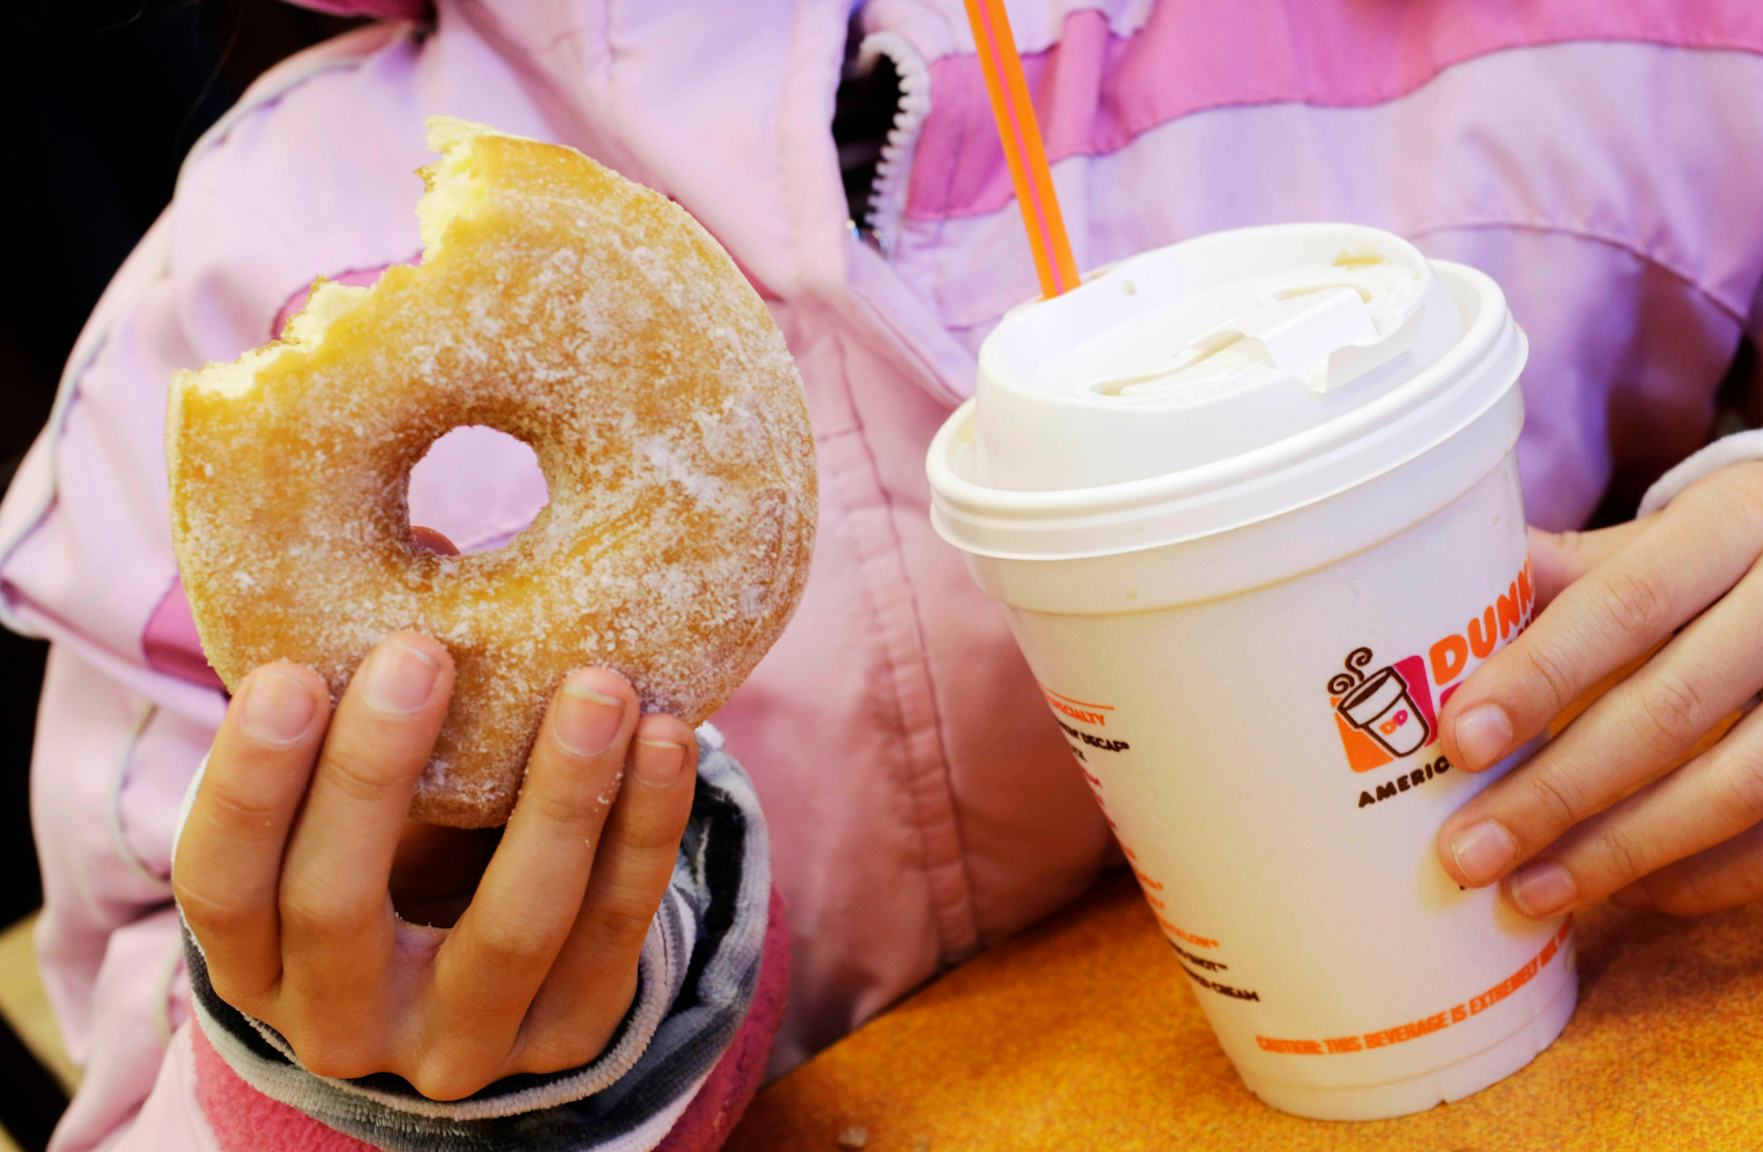 Dunkin' Donuts announced plans to get rid of foam cups 6 years ago, and